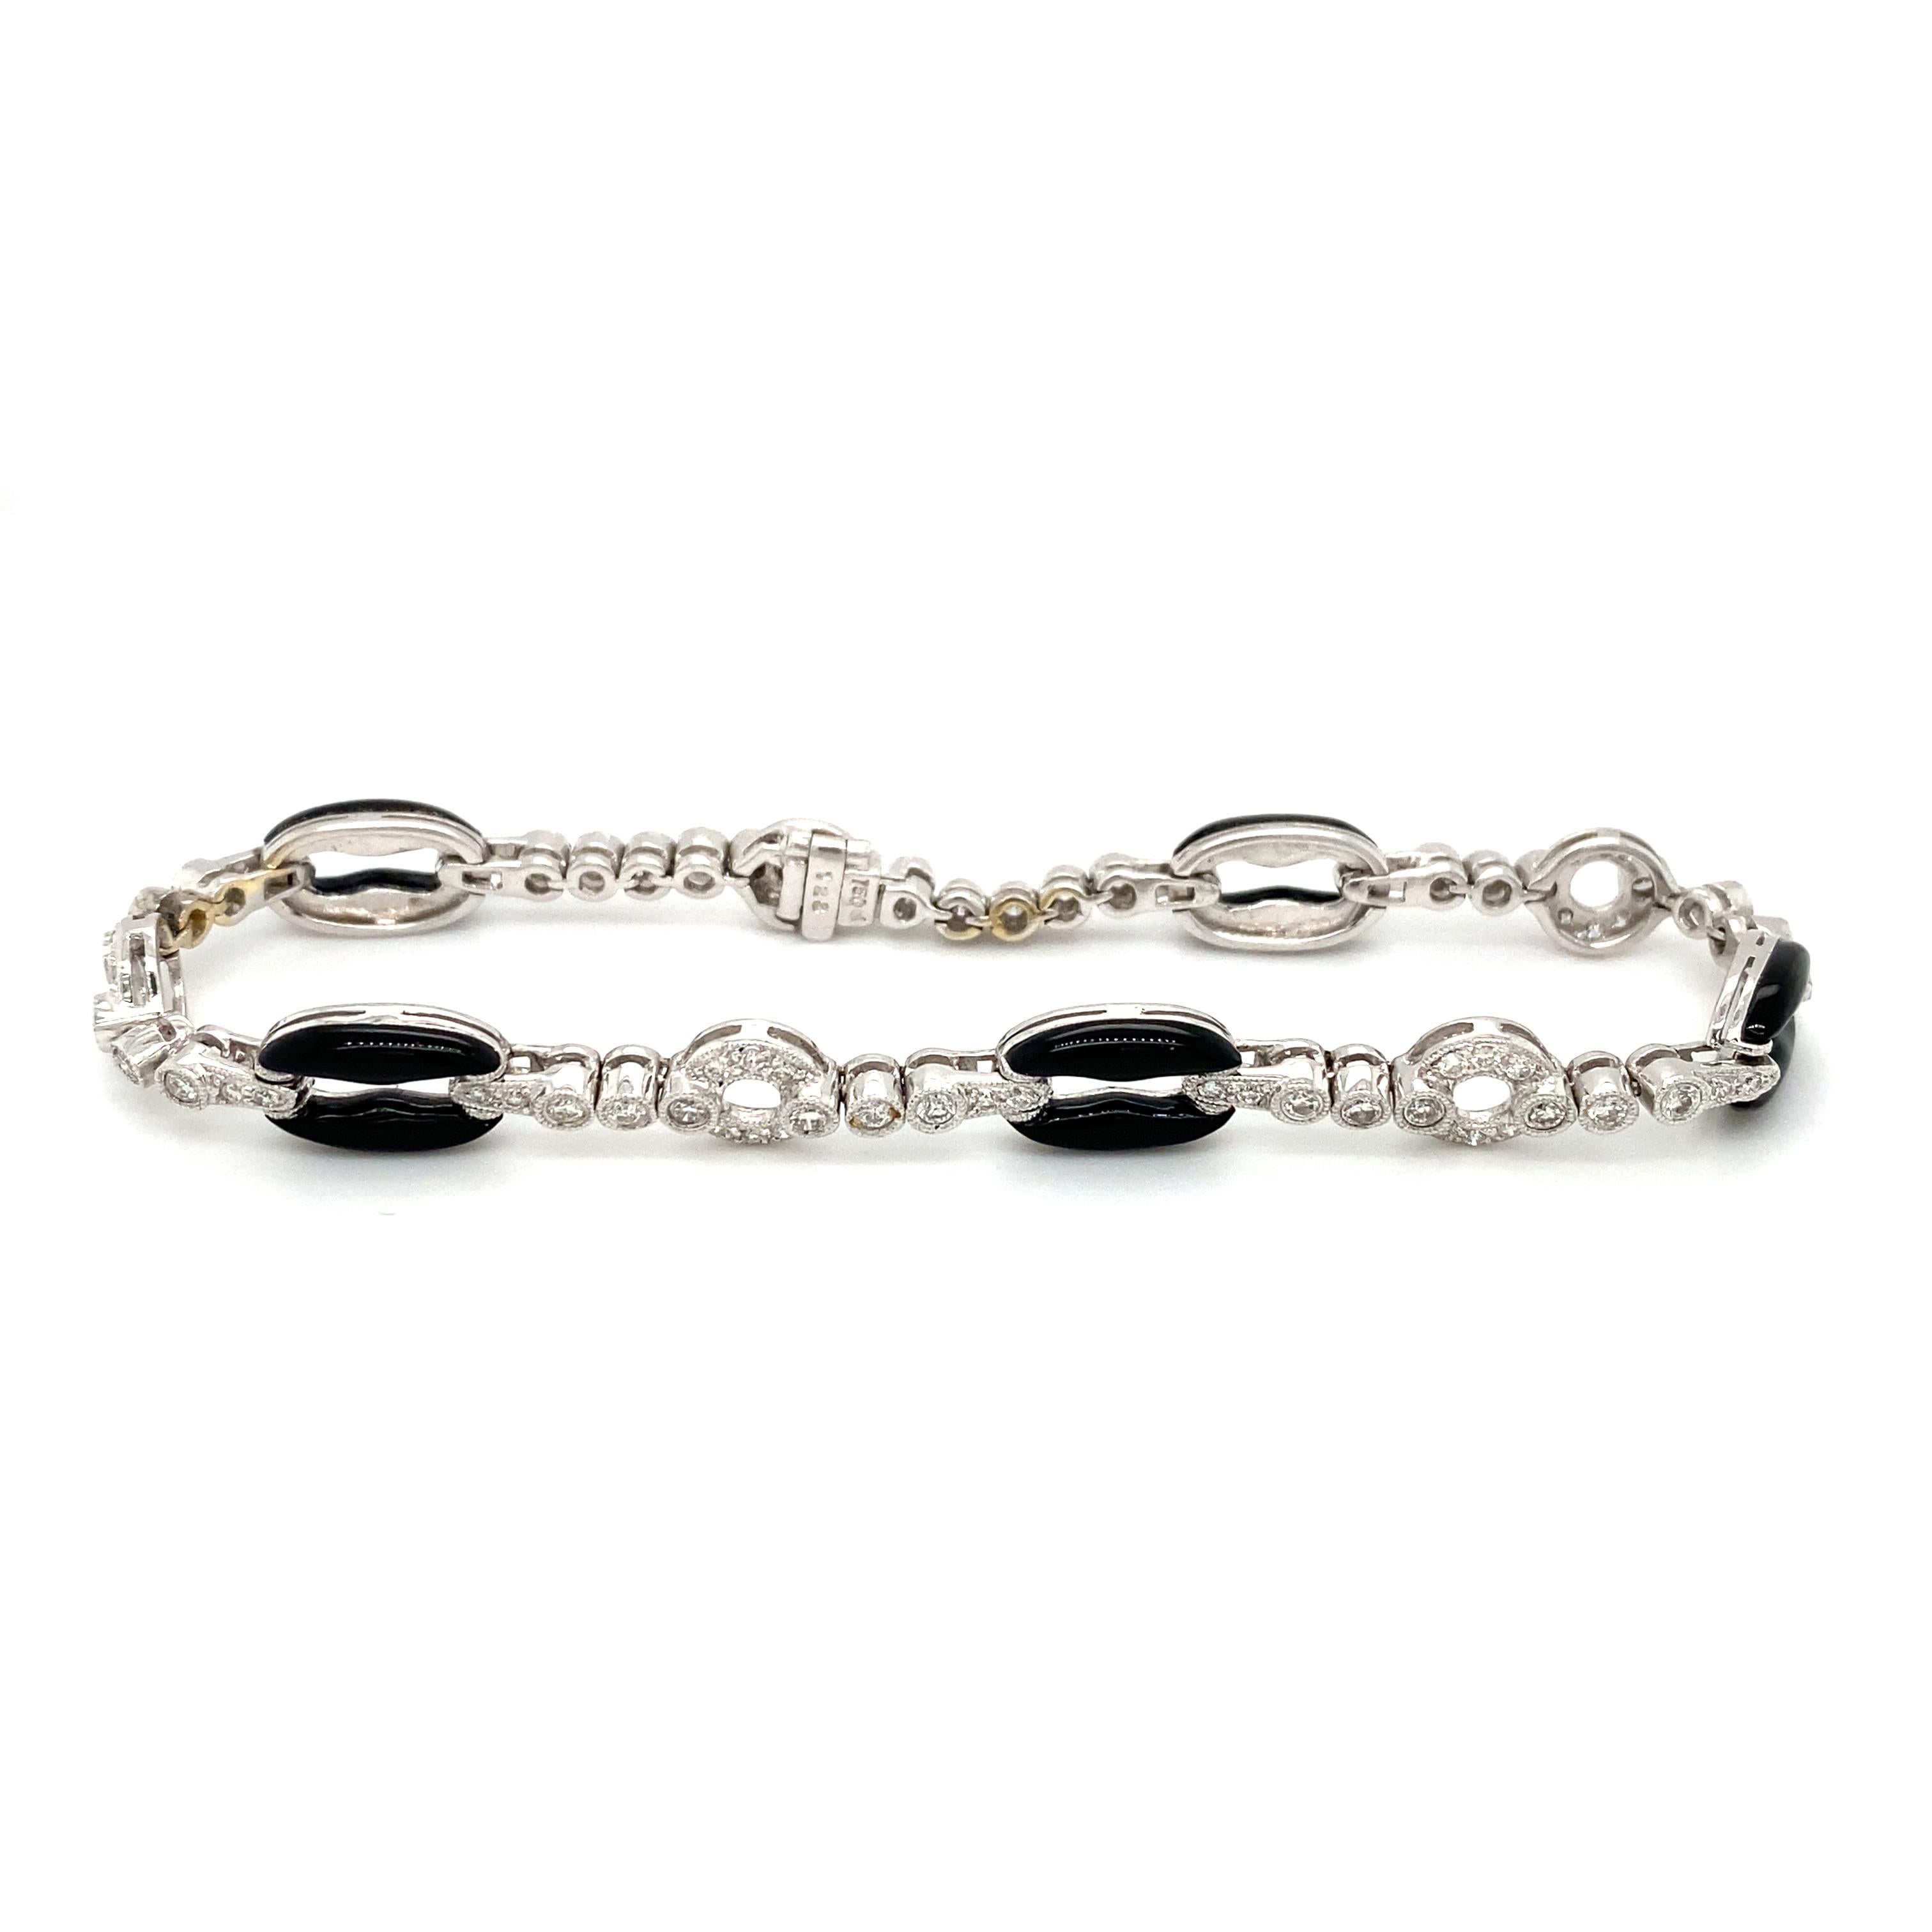 Item Details: This bracelet has onyx and diamonds in a unique linked setting. There are over one carat of diamonds in this tennis bracelet and it is perfect to wear for day or night! Dating back to the 1960s, this is a beautiful retro vintage